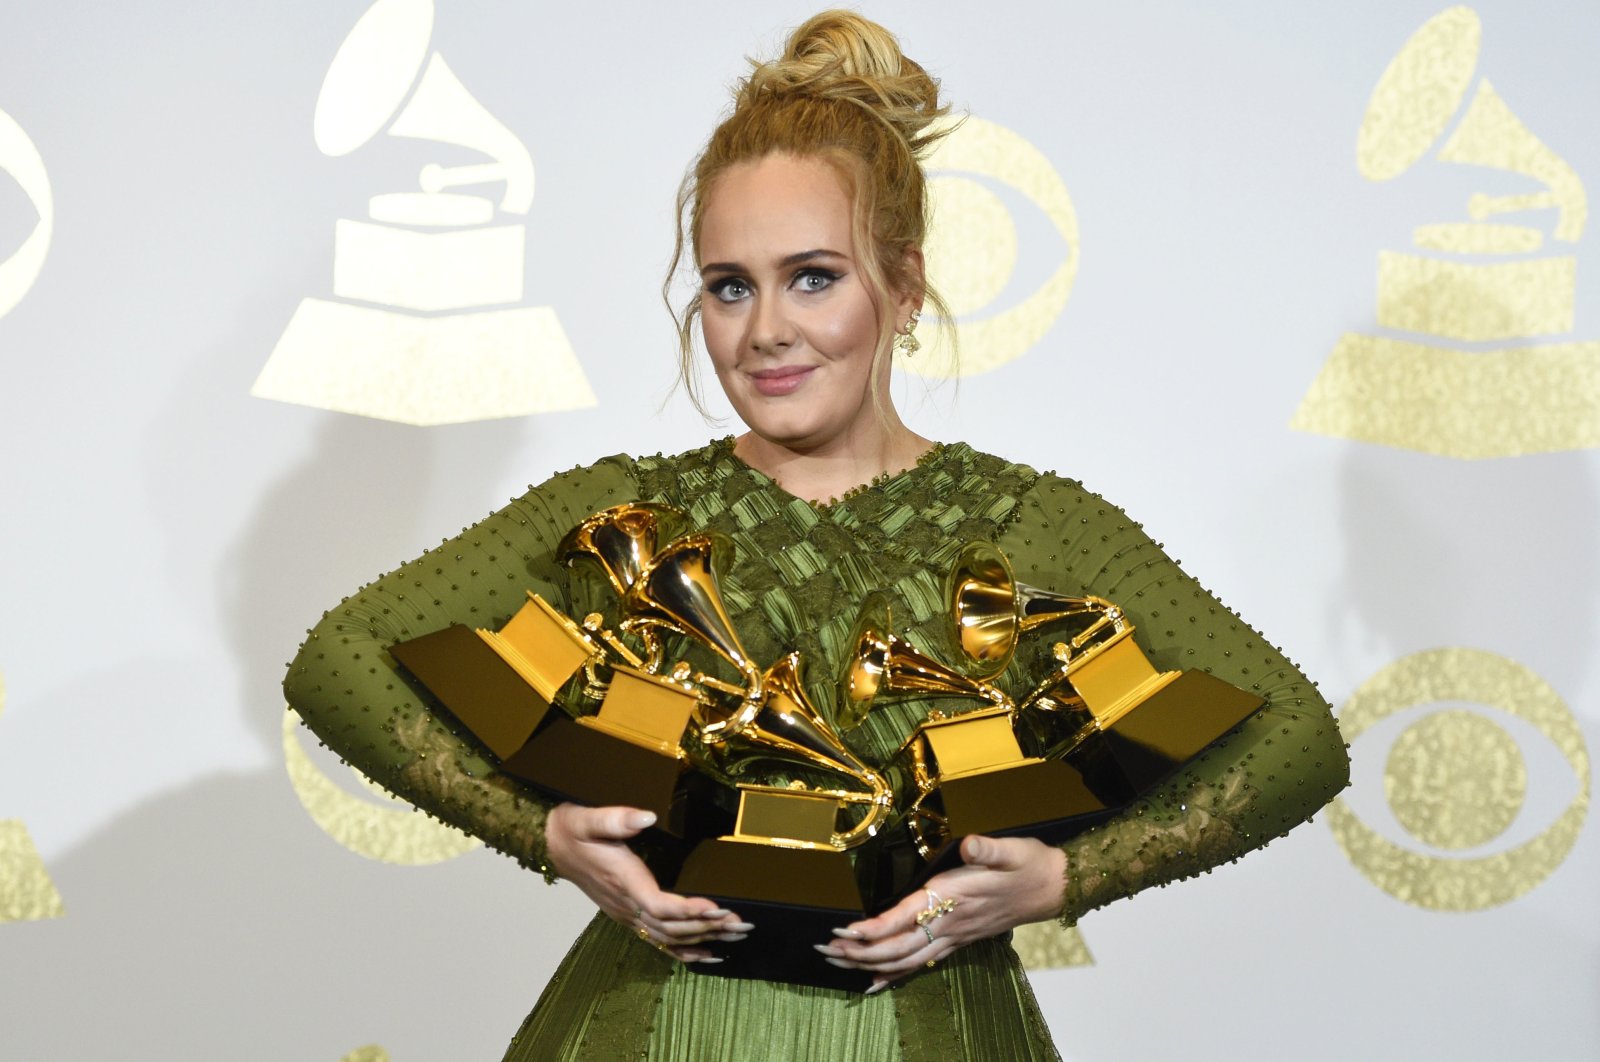 Adele poses in the press room with the awards for album of the year for "25," song of the year for "Hello," record of the year for "Hello," best pop solo performance for "Hello," and best pop vocal album for "25" at the Grammy Awards in Los Angeles, U.S., Feb. 12, 2017. (AP Photo)